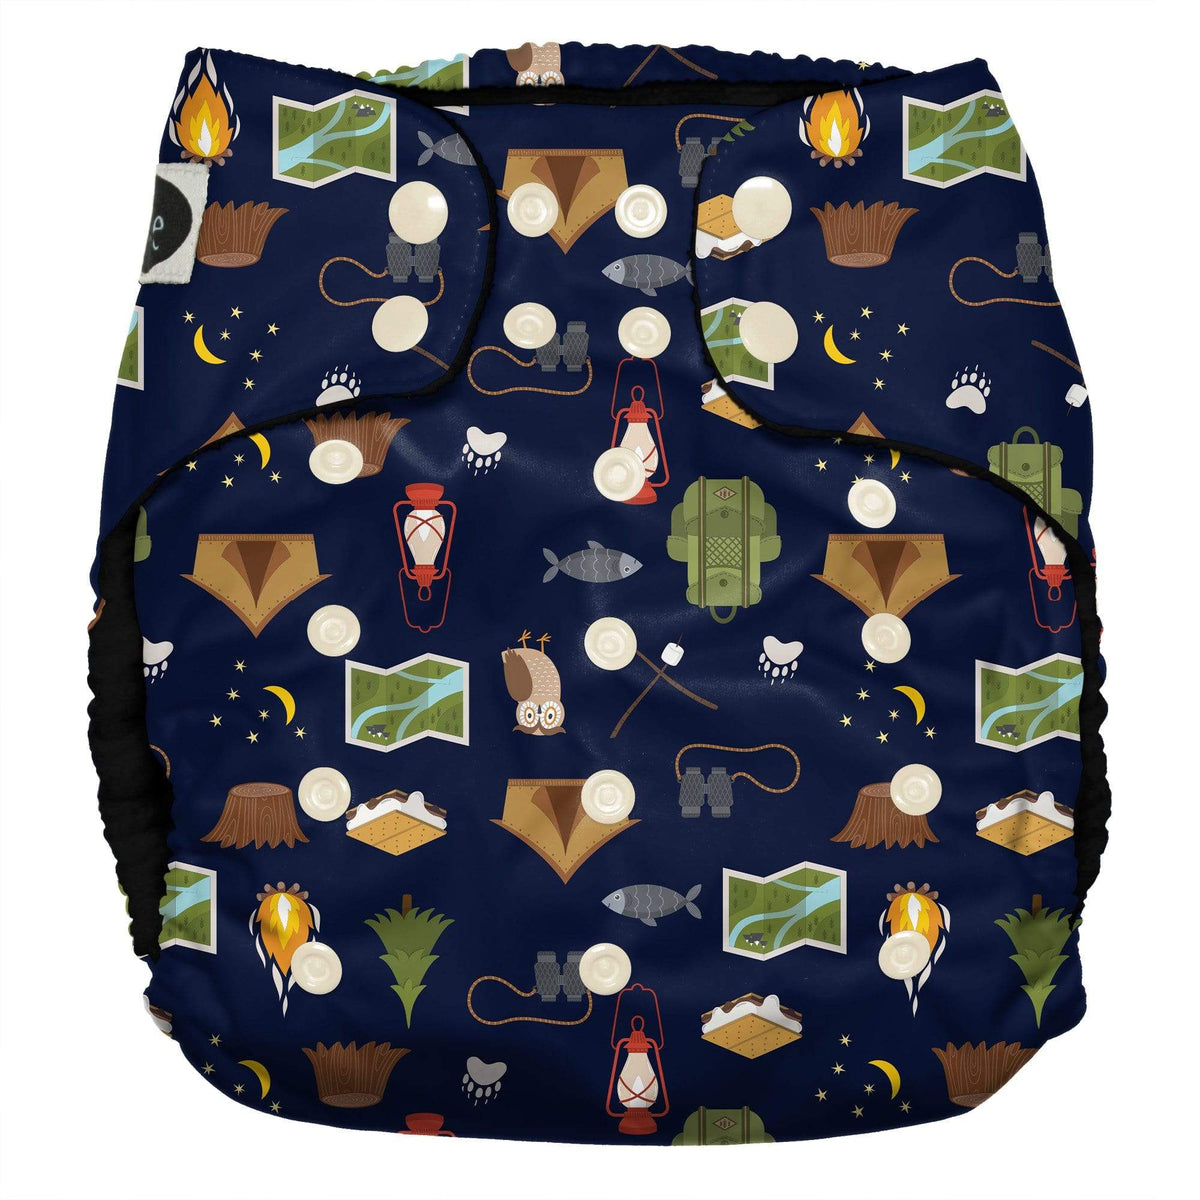 Imagine Baby Snap Pocket Diapers XL / Camp Evenings